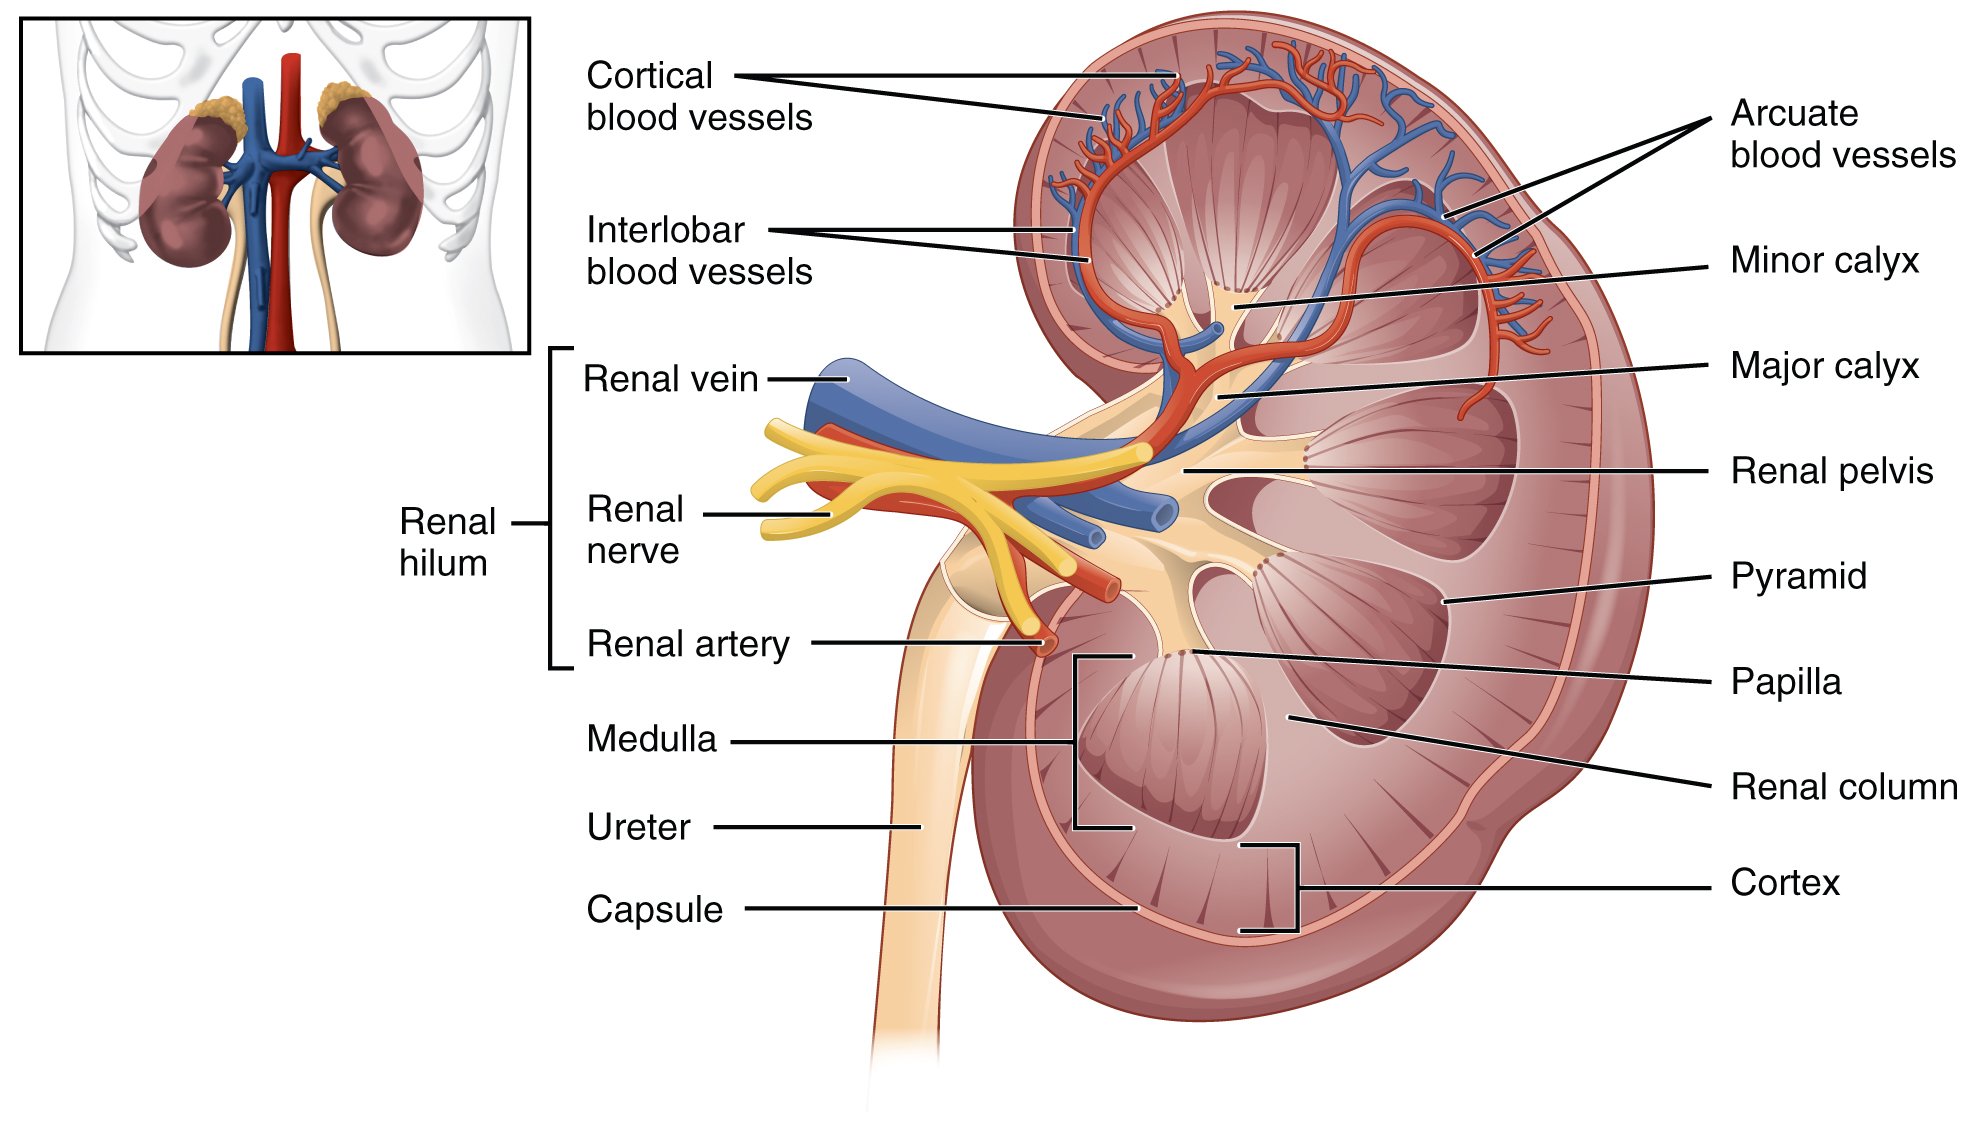 25.3 Gross Anatomy of the Kidney  Anatomy and Physiology